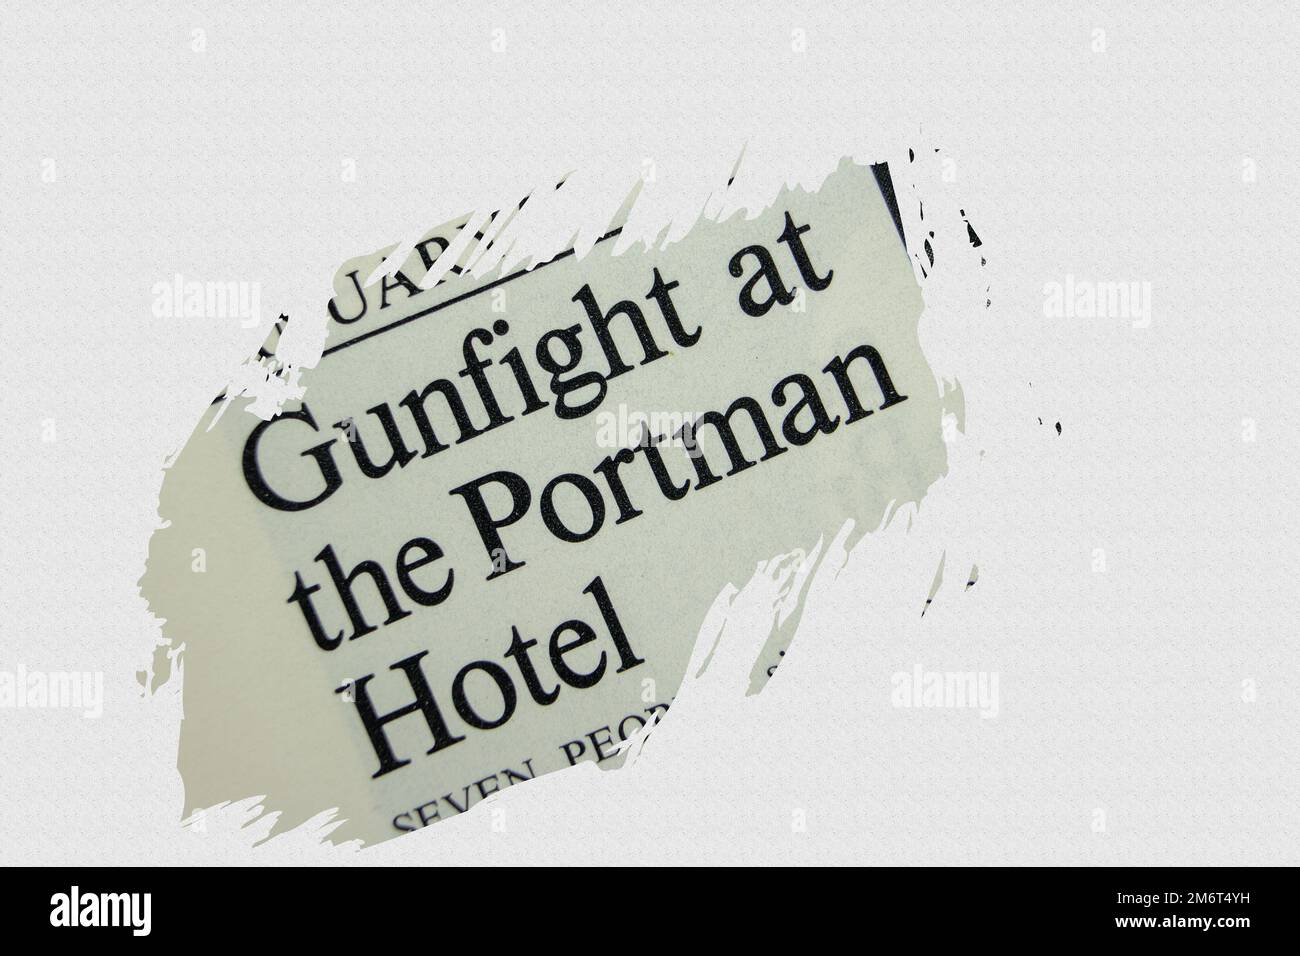 news story from 1975 newspaper headline article title - Gunfight at the Portman Hotel Stock Photo